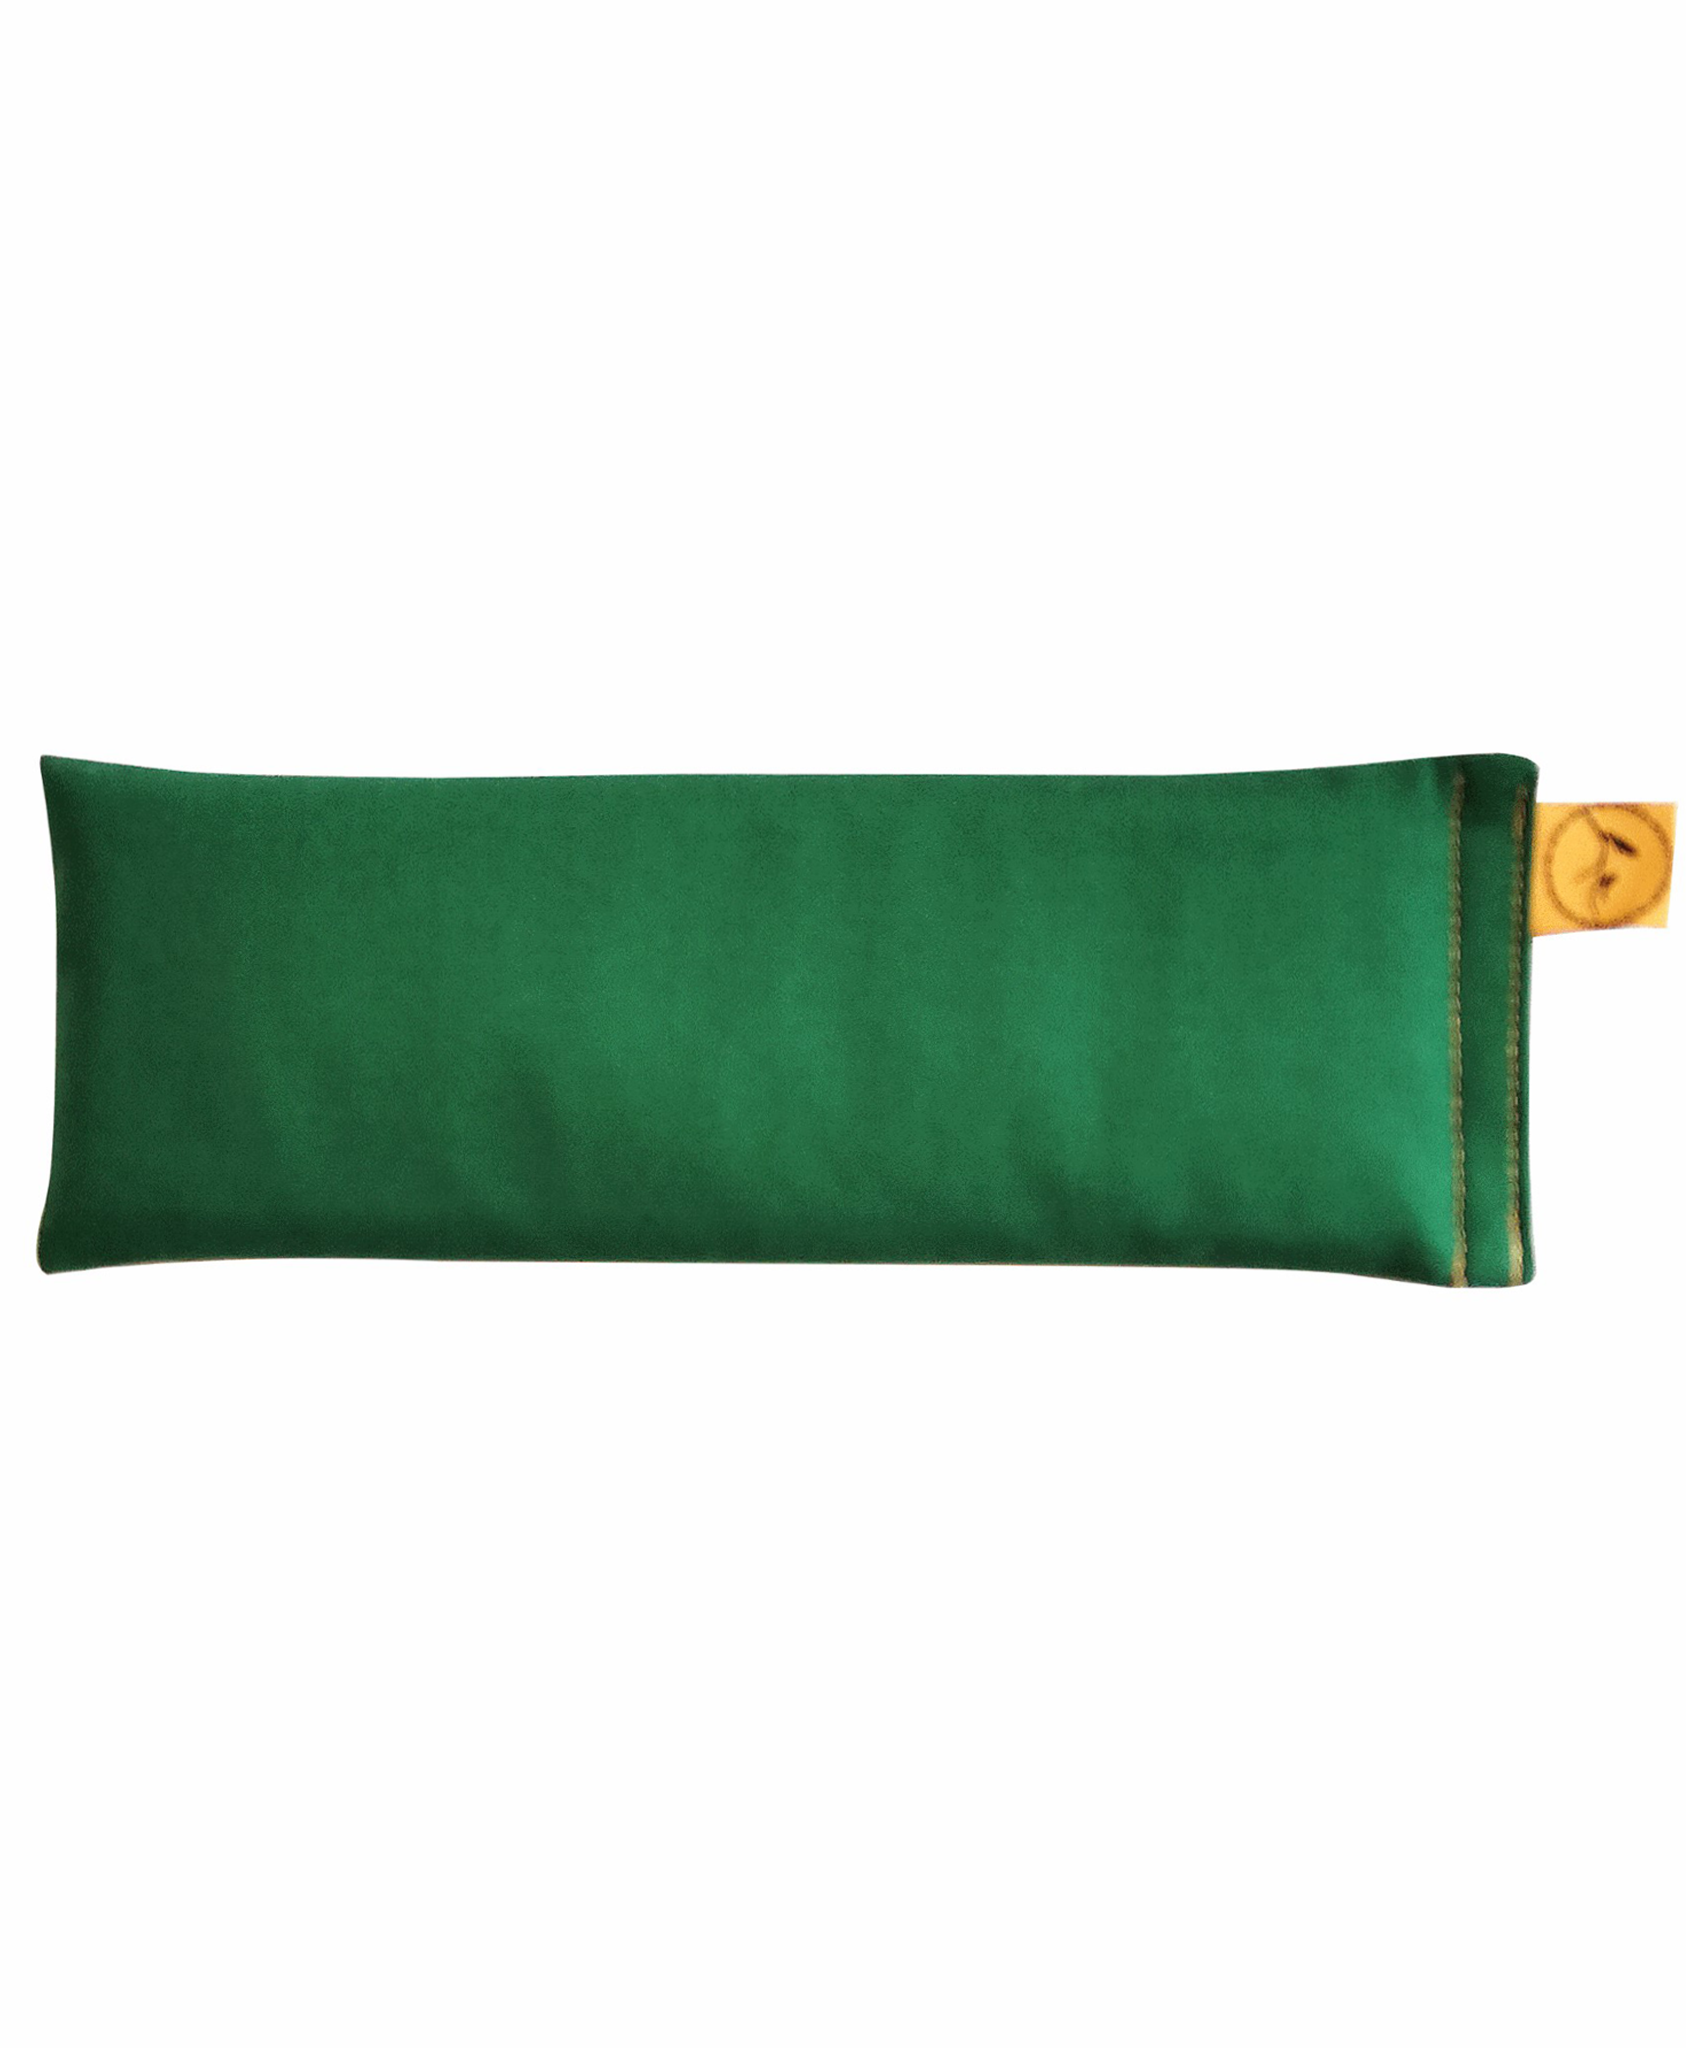 Forest-Green-Classic-eye-pillow-lavender-sore-pain-relief-yoga